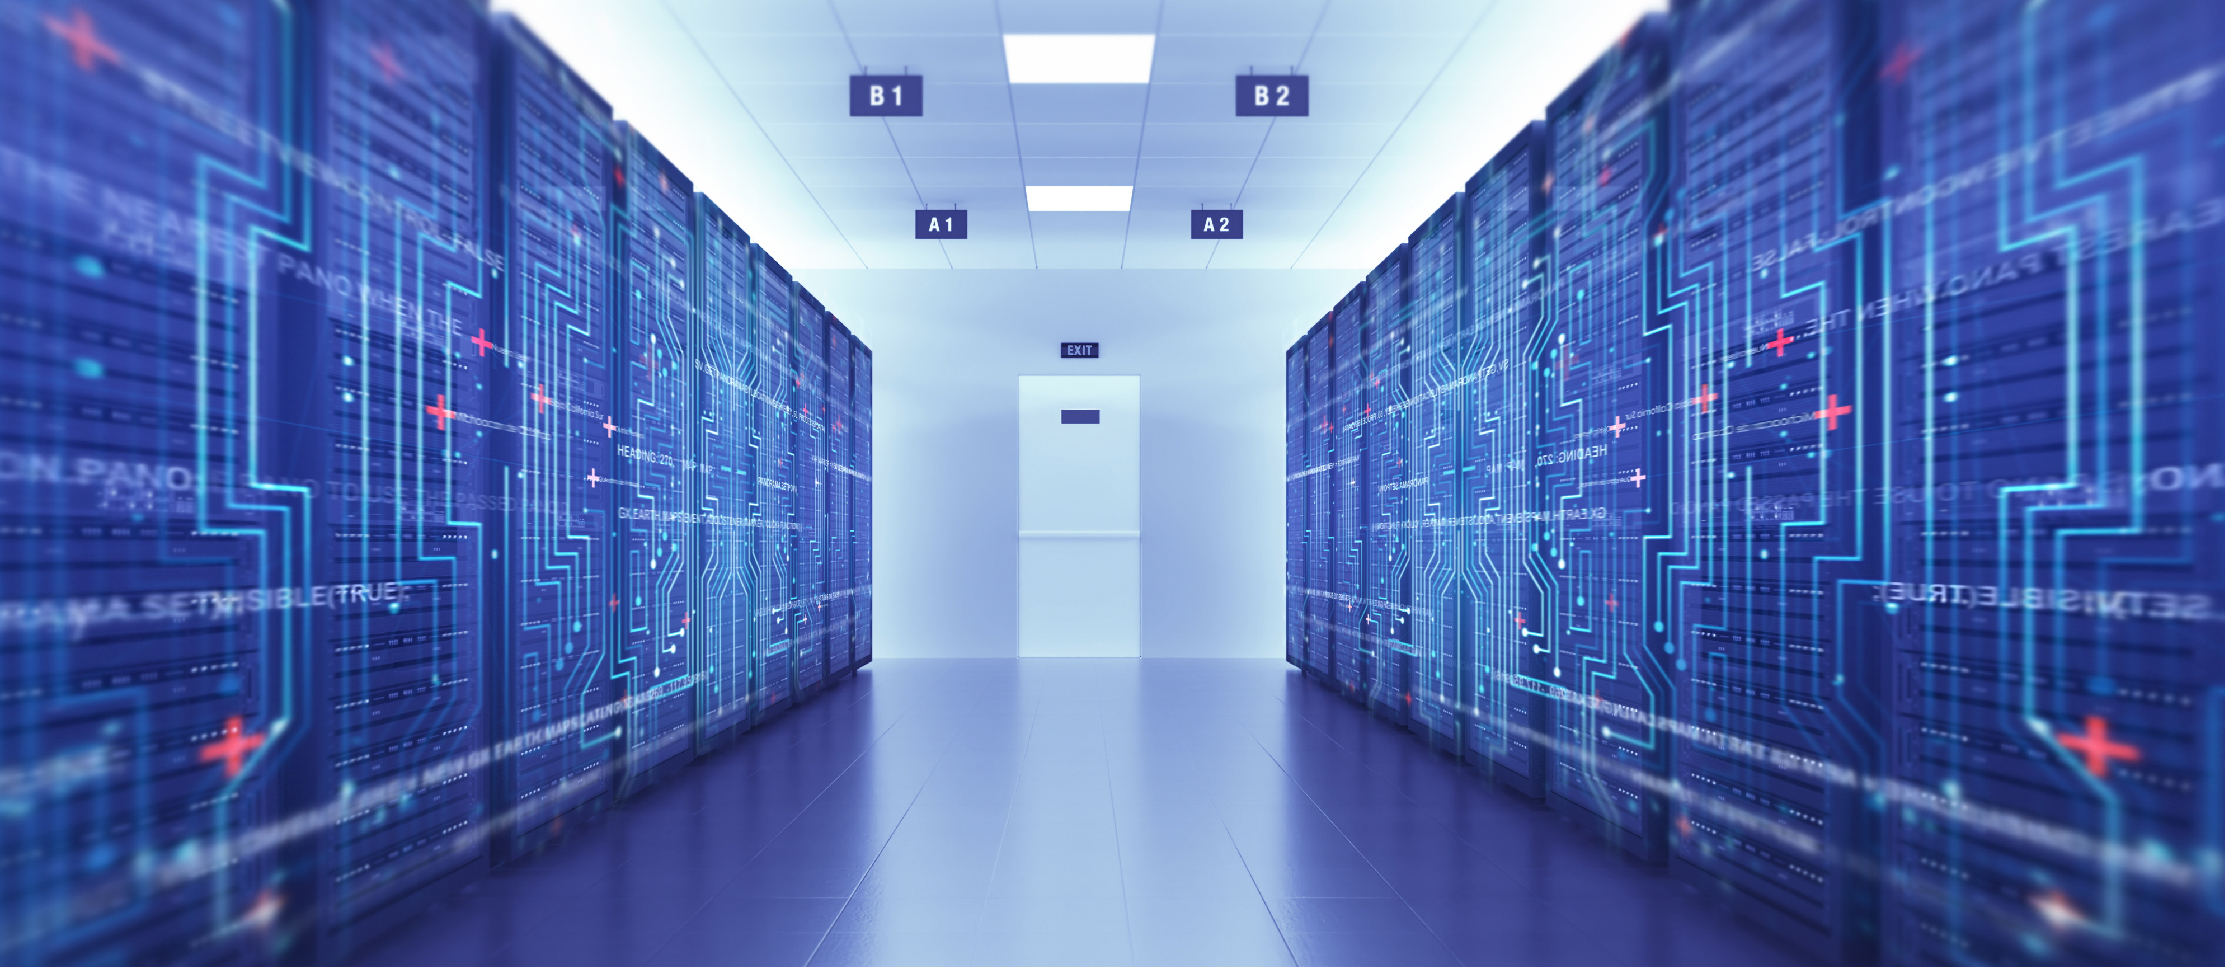 image of a room of database servers